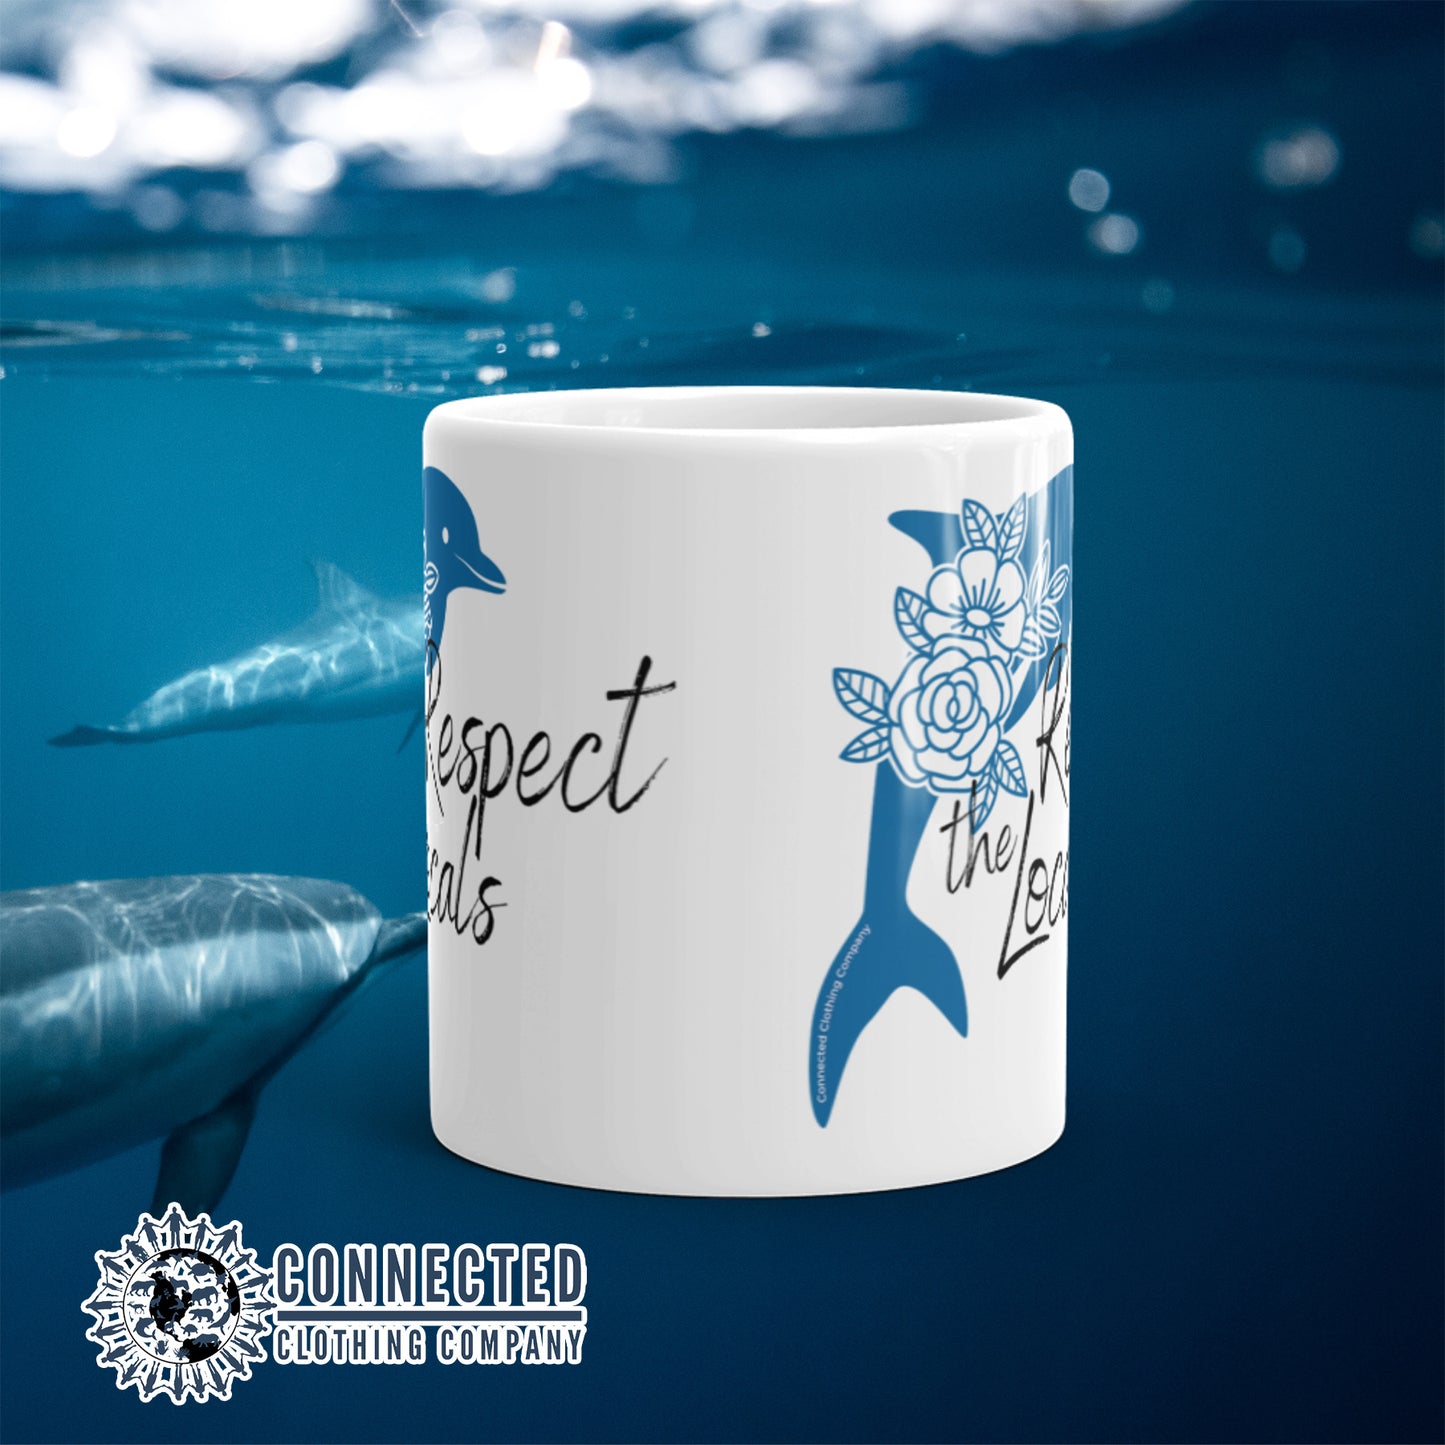 Respect The Locals Dolphin Classic Mug - sweetsherriloudesigns - Ethical and Sustainable Clothing That Gives Back - 10% donated to Mission Blue ocean conservation